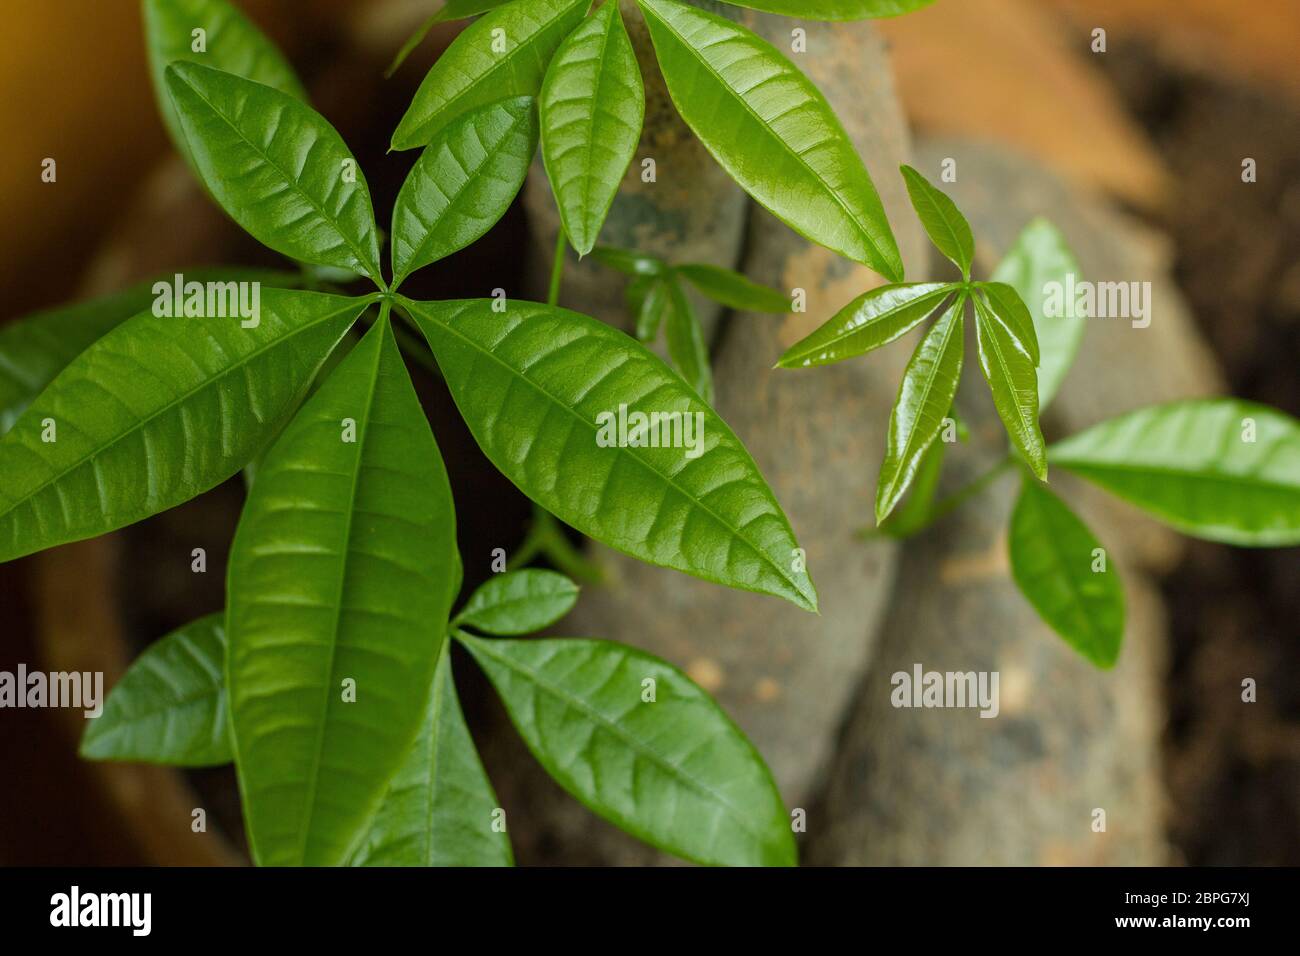 Money tree Pachira aquatica with leaves in a strong green shade symbol of luck wealth money tree care vitality fresh cosmetic Stock Photo